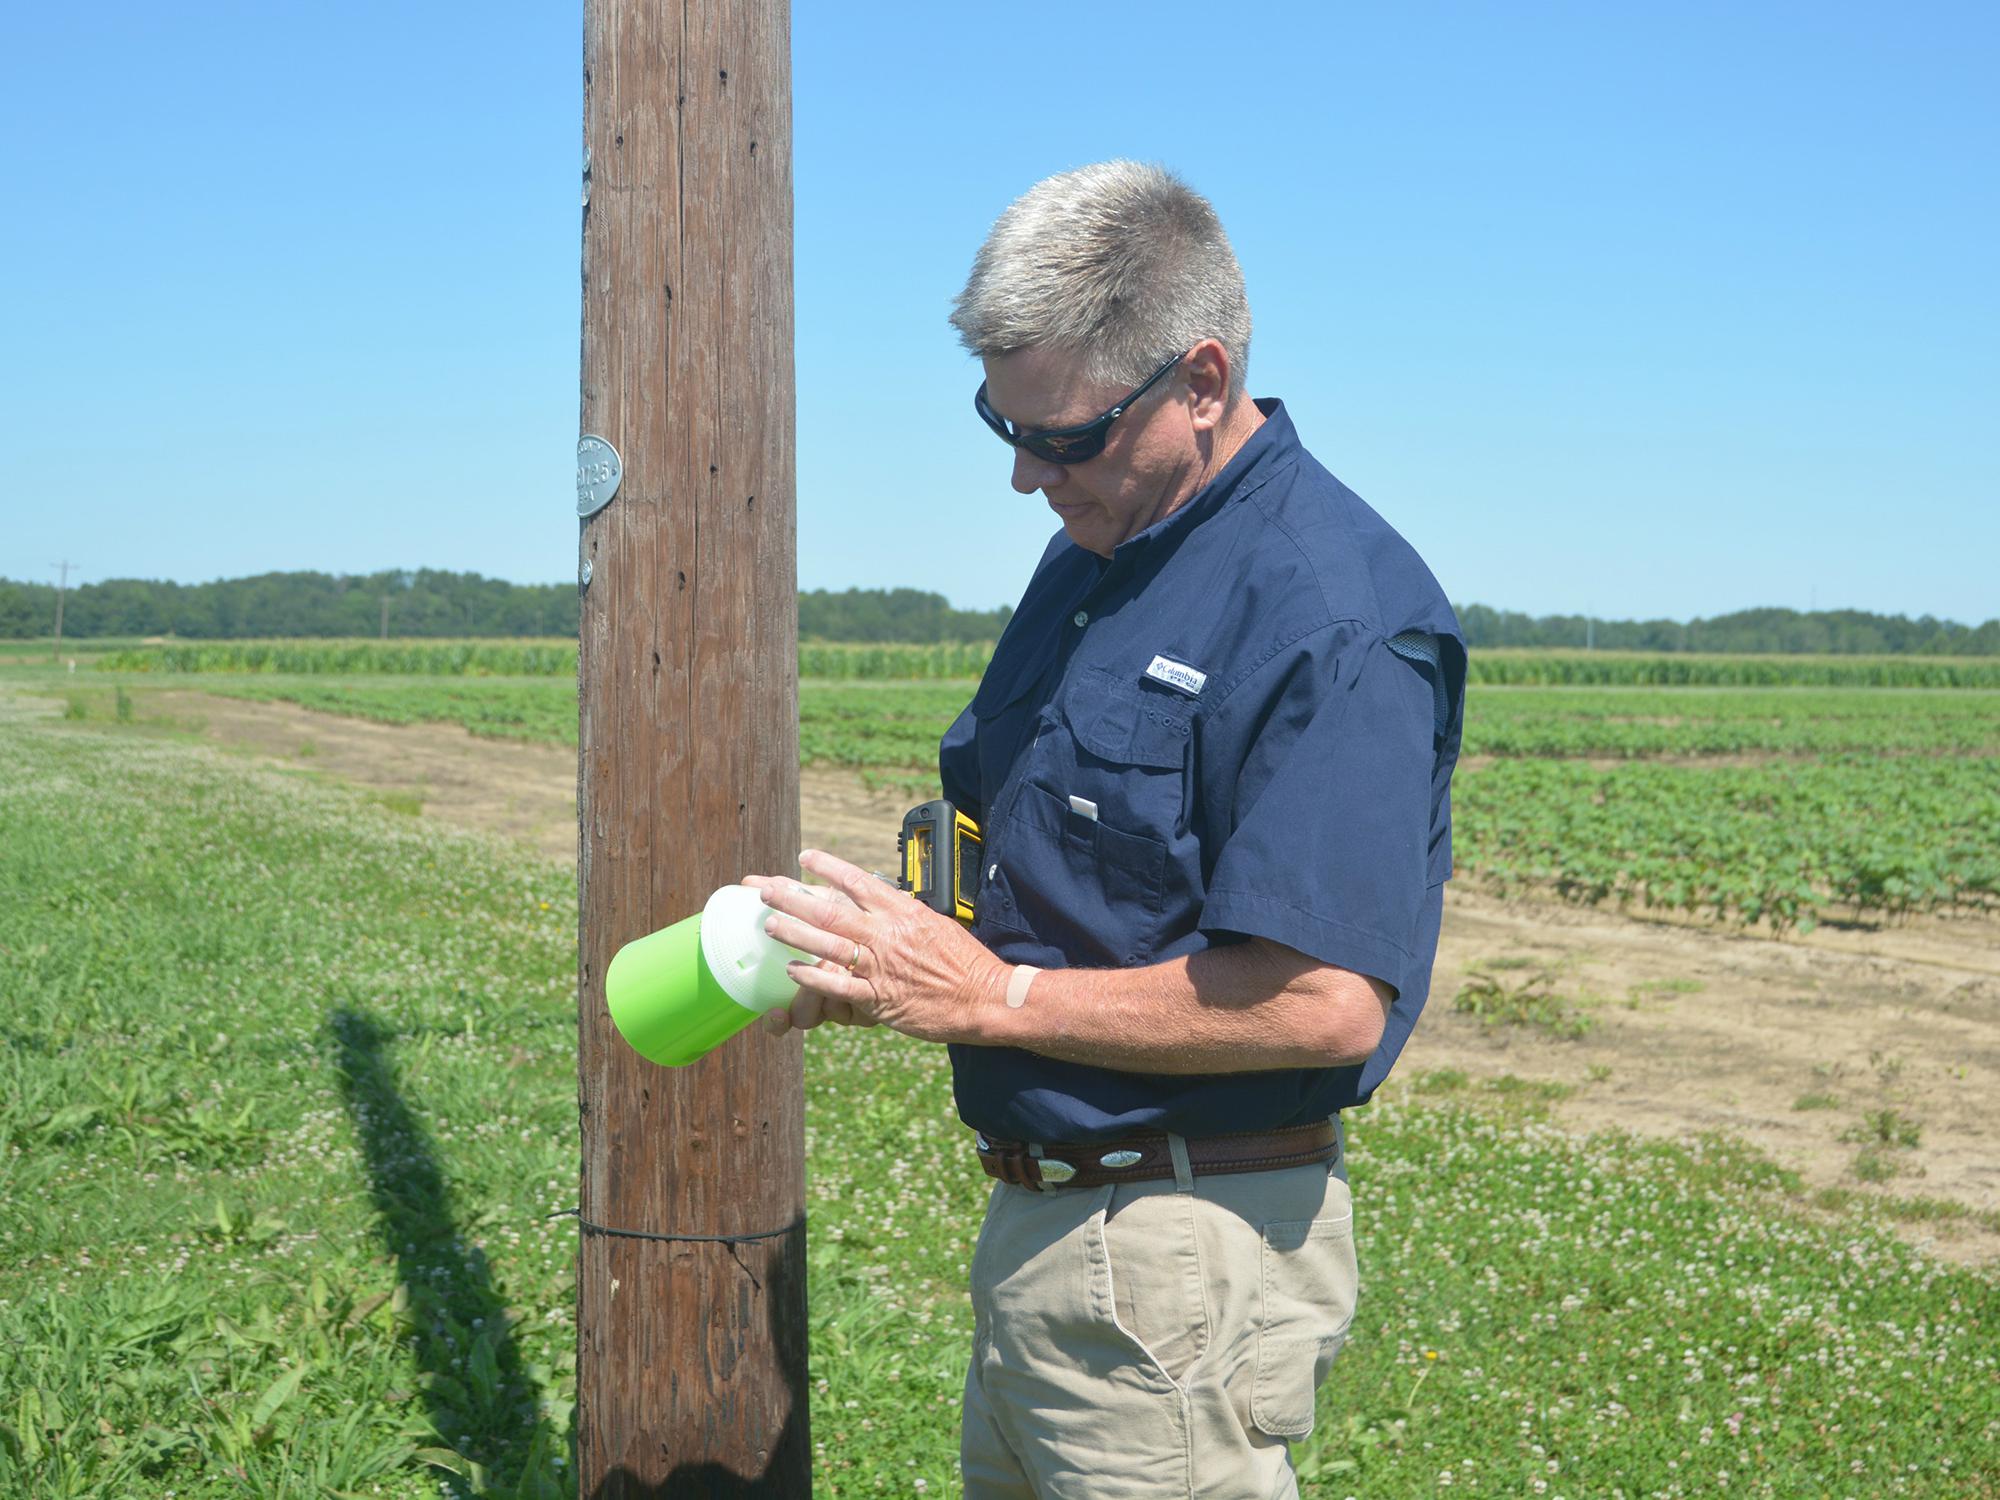 Mississippi Boll Weevil Management Corp. representative Mike Mullendore checks one of the cone-shaped traps located near a Mississippi State University research field on June 27, 2017. The traps evolved from U.S. Department of Agriculture research at the Robey Wentworth Harned Laboratory, commonly known as the Boll Weevil Research Lab at MSU. (Photo by MSU Extension Service/Linda Breazeale) 